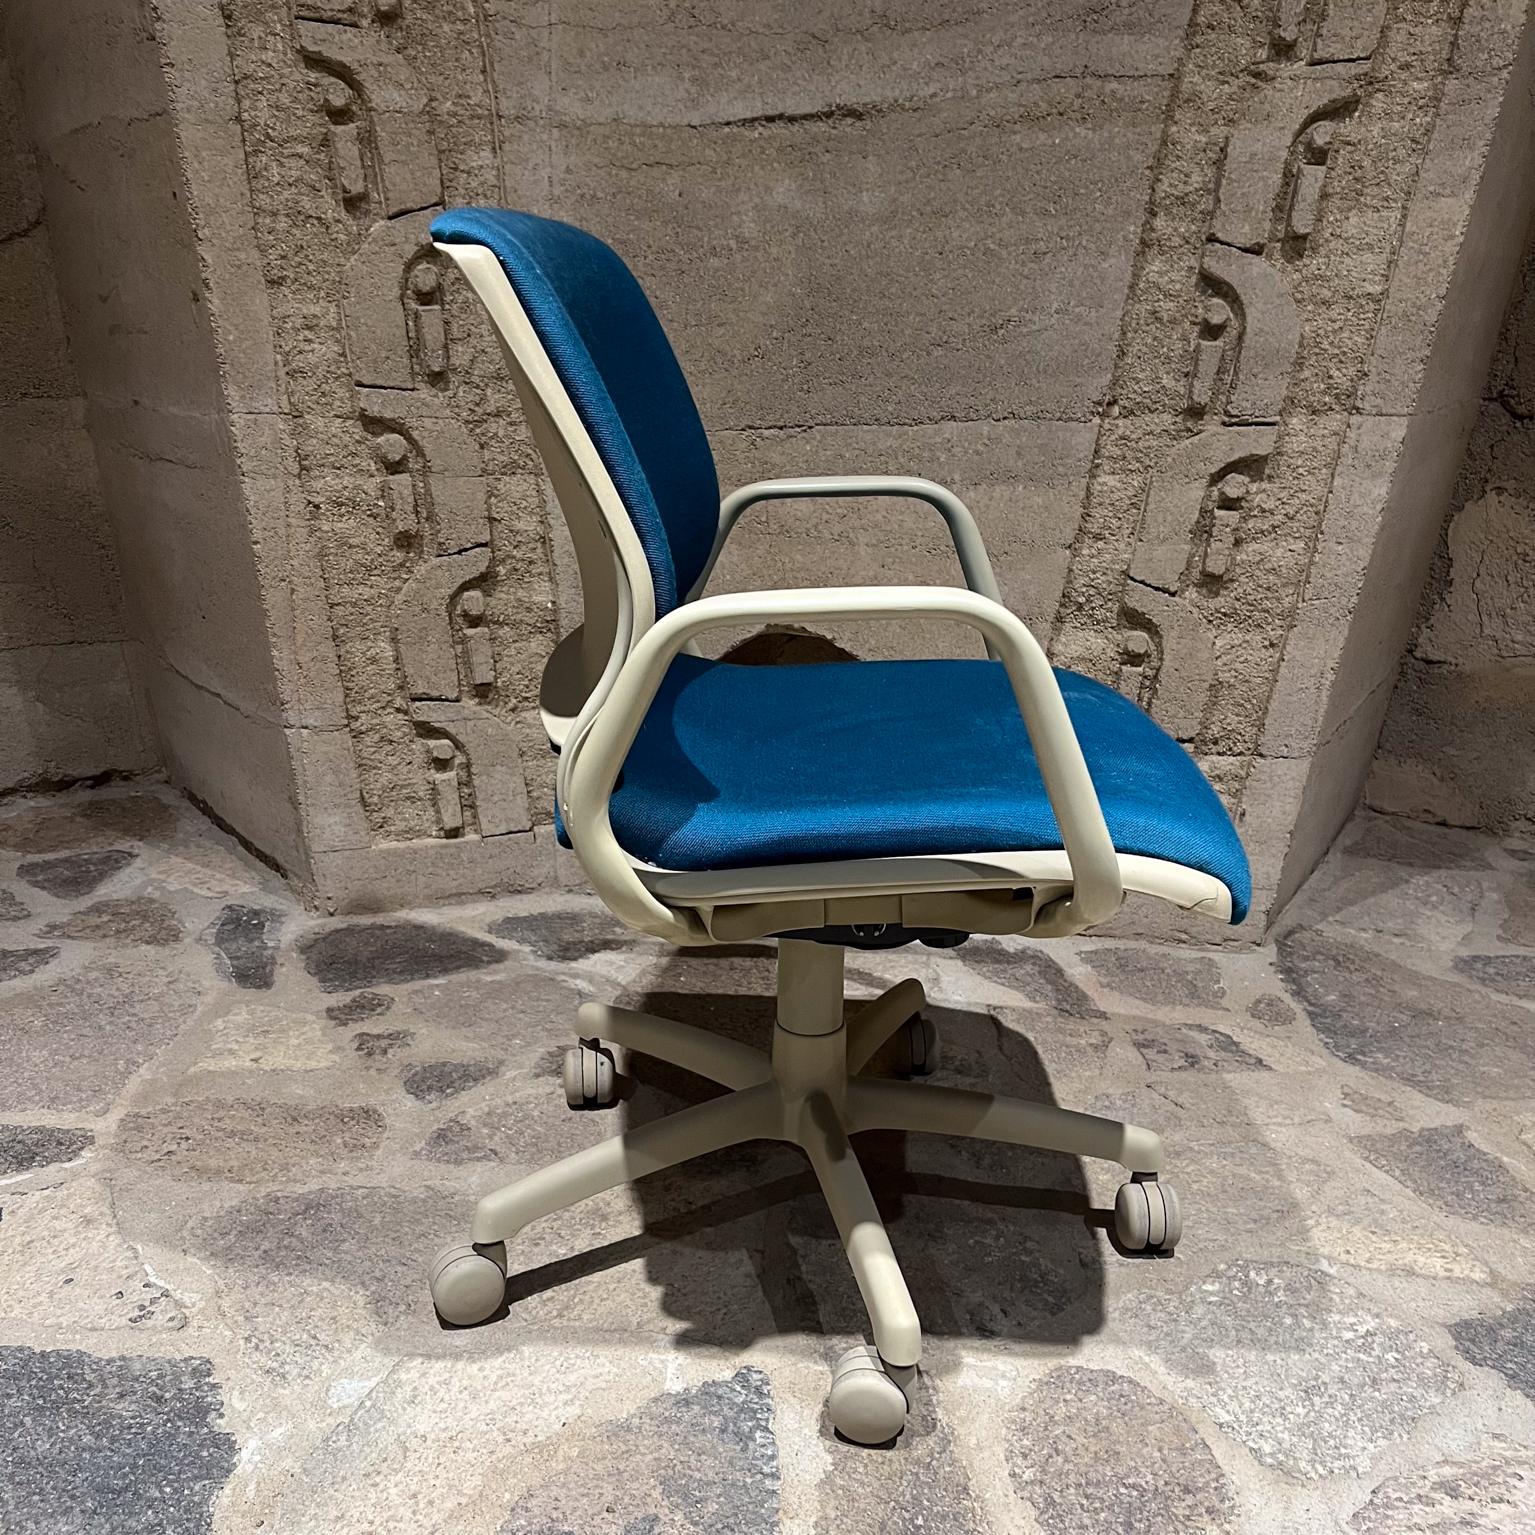 American 1990s Blue Steelcase Rolling Office Executive Desk Chair For Sale